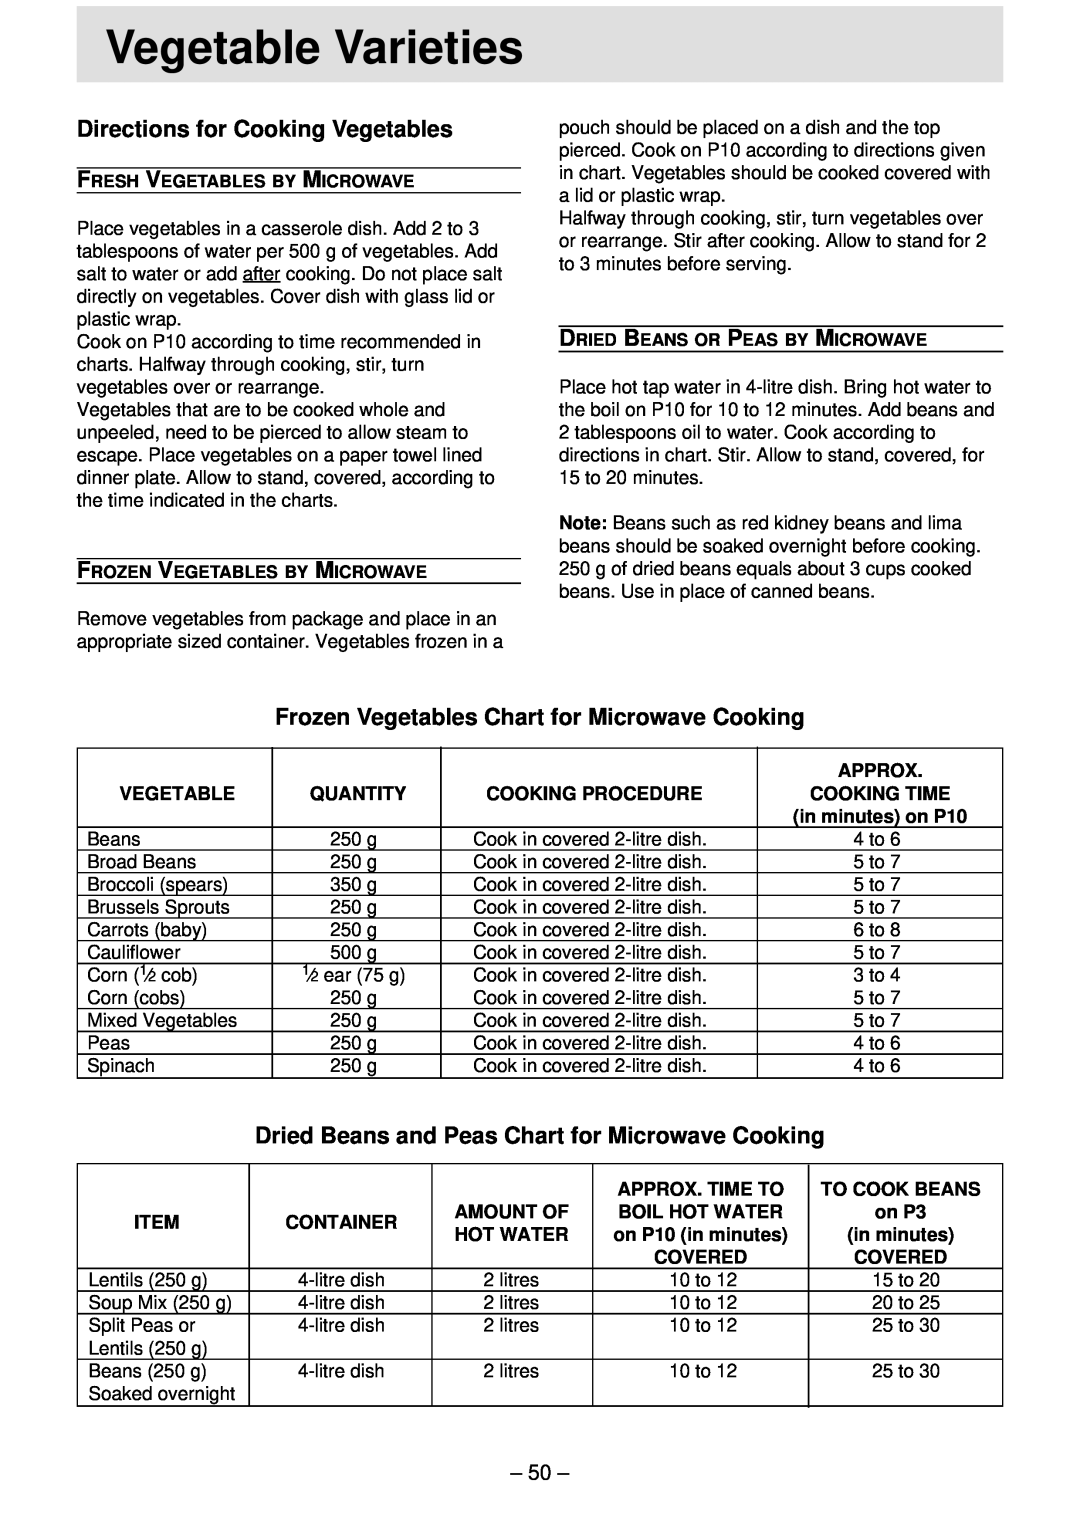 Panasonic NN-S761 Vegetable Varieties, Directions for Cooking Vegetables, Frozen Vegetables Chart for Microwave Cooking 